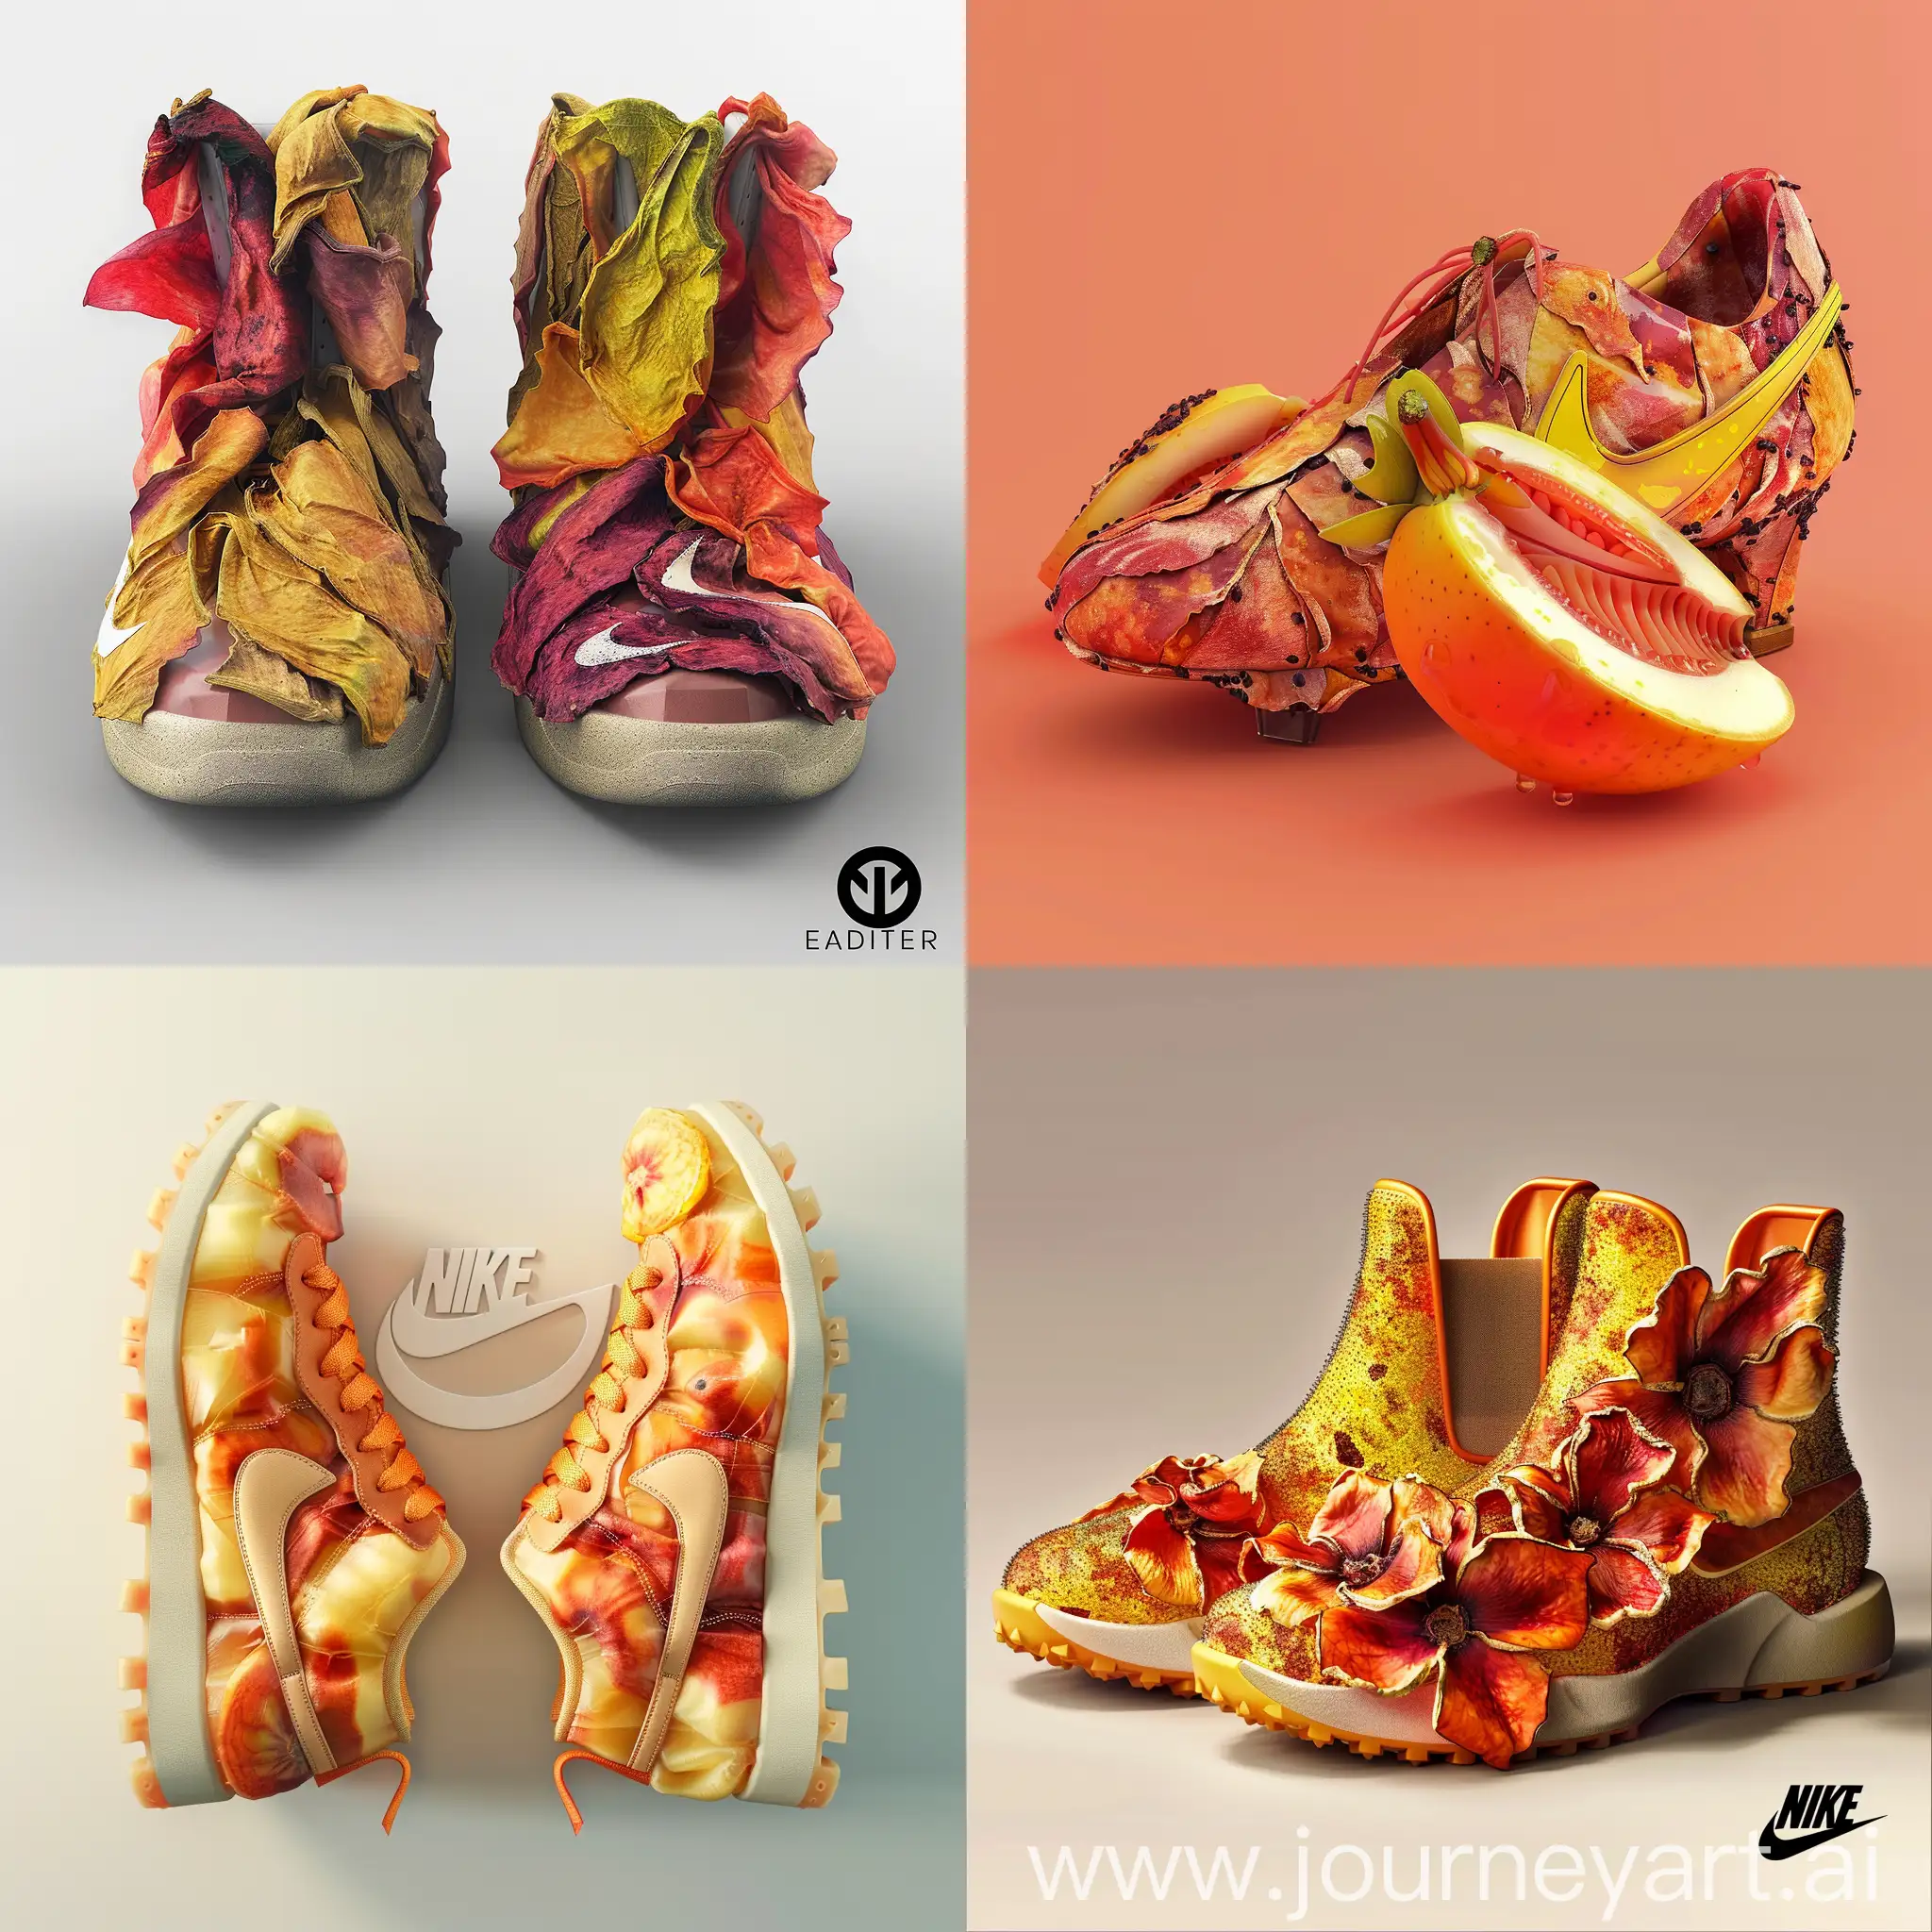 pair of shoes made of dried fruit skins, 3d render, bright colours, clean composition, beautiful artwork, nike logo